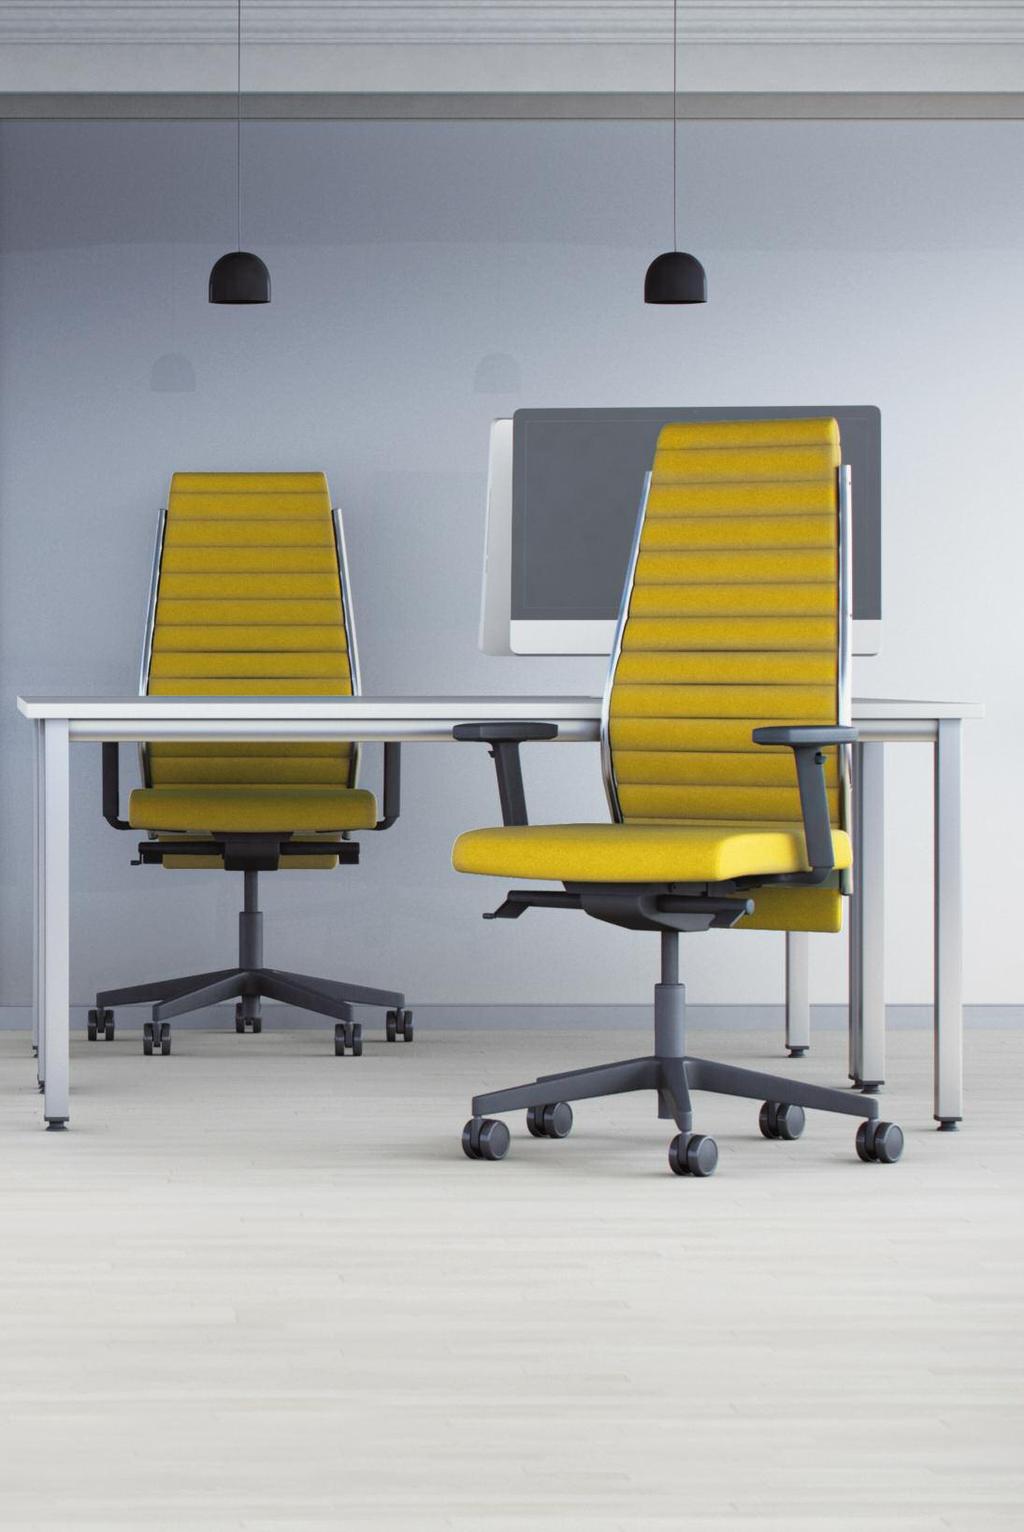 introduction edge_design COnTenTs This collection will provide a complete solution for your organisation including task managerial, meeting, executive, reception and breakout seating and represents